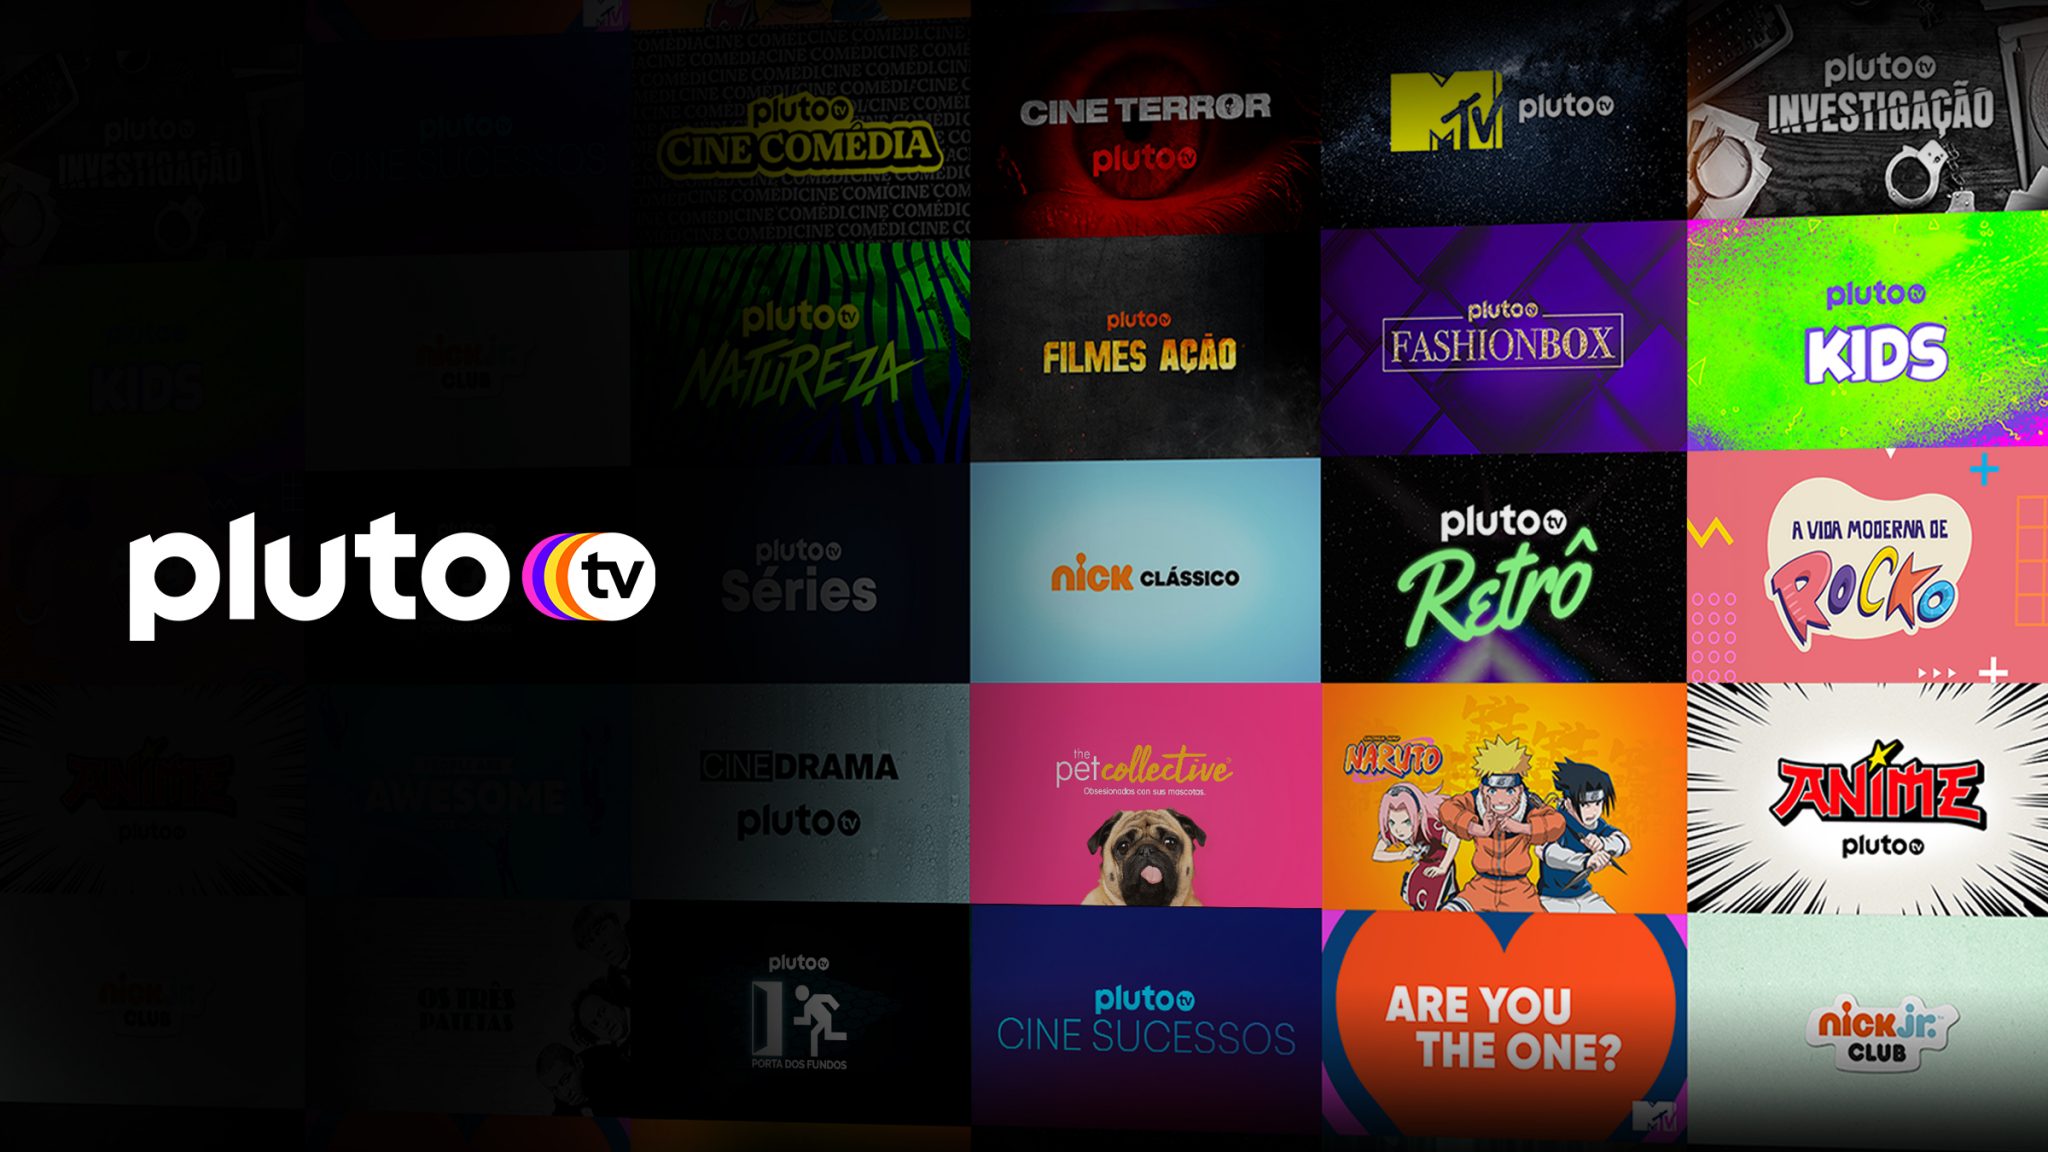 Pluto Tv Launches In Brazil Digital Tv Europe pluto tv launches in brazil digital